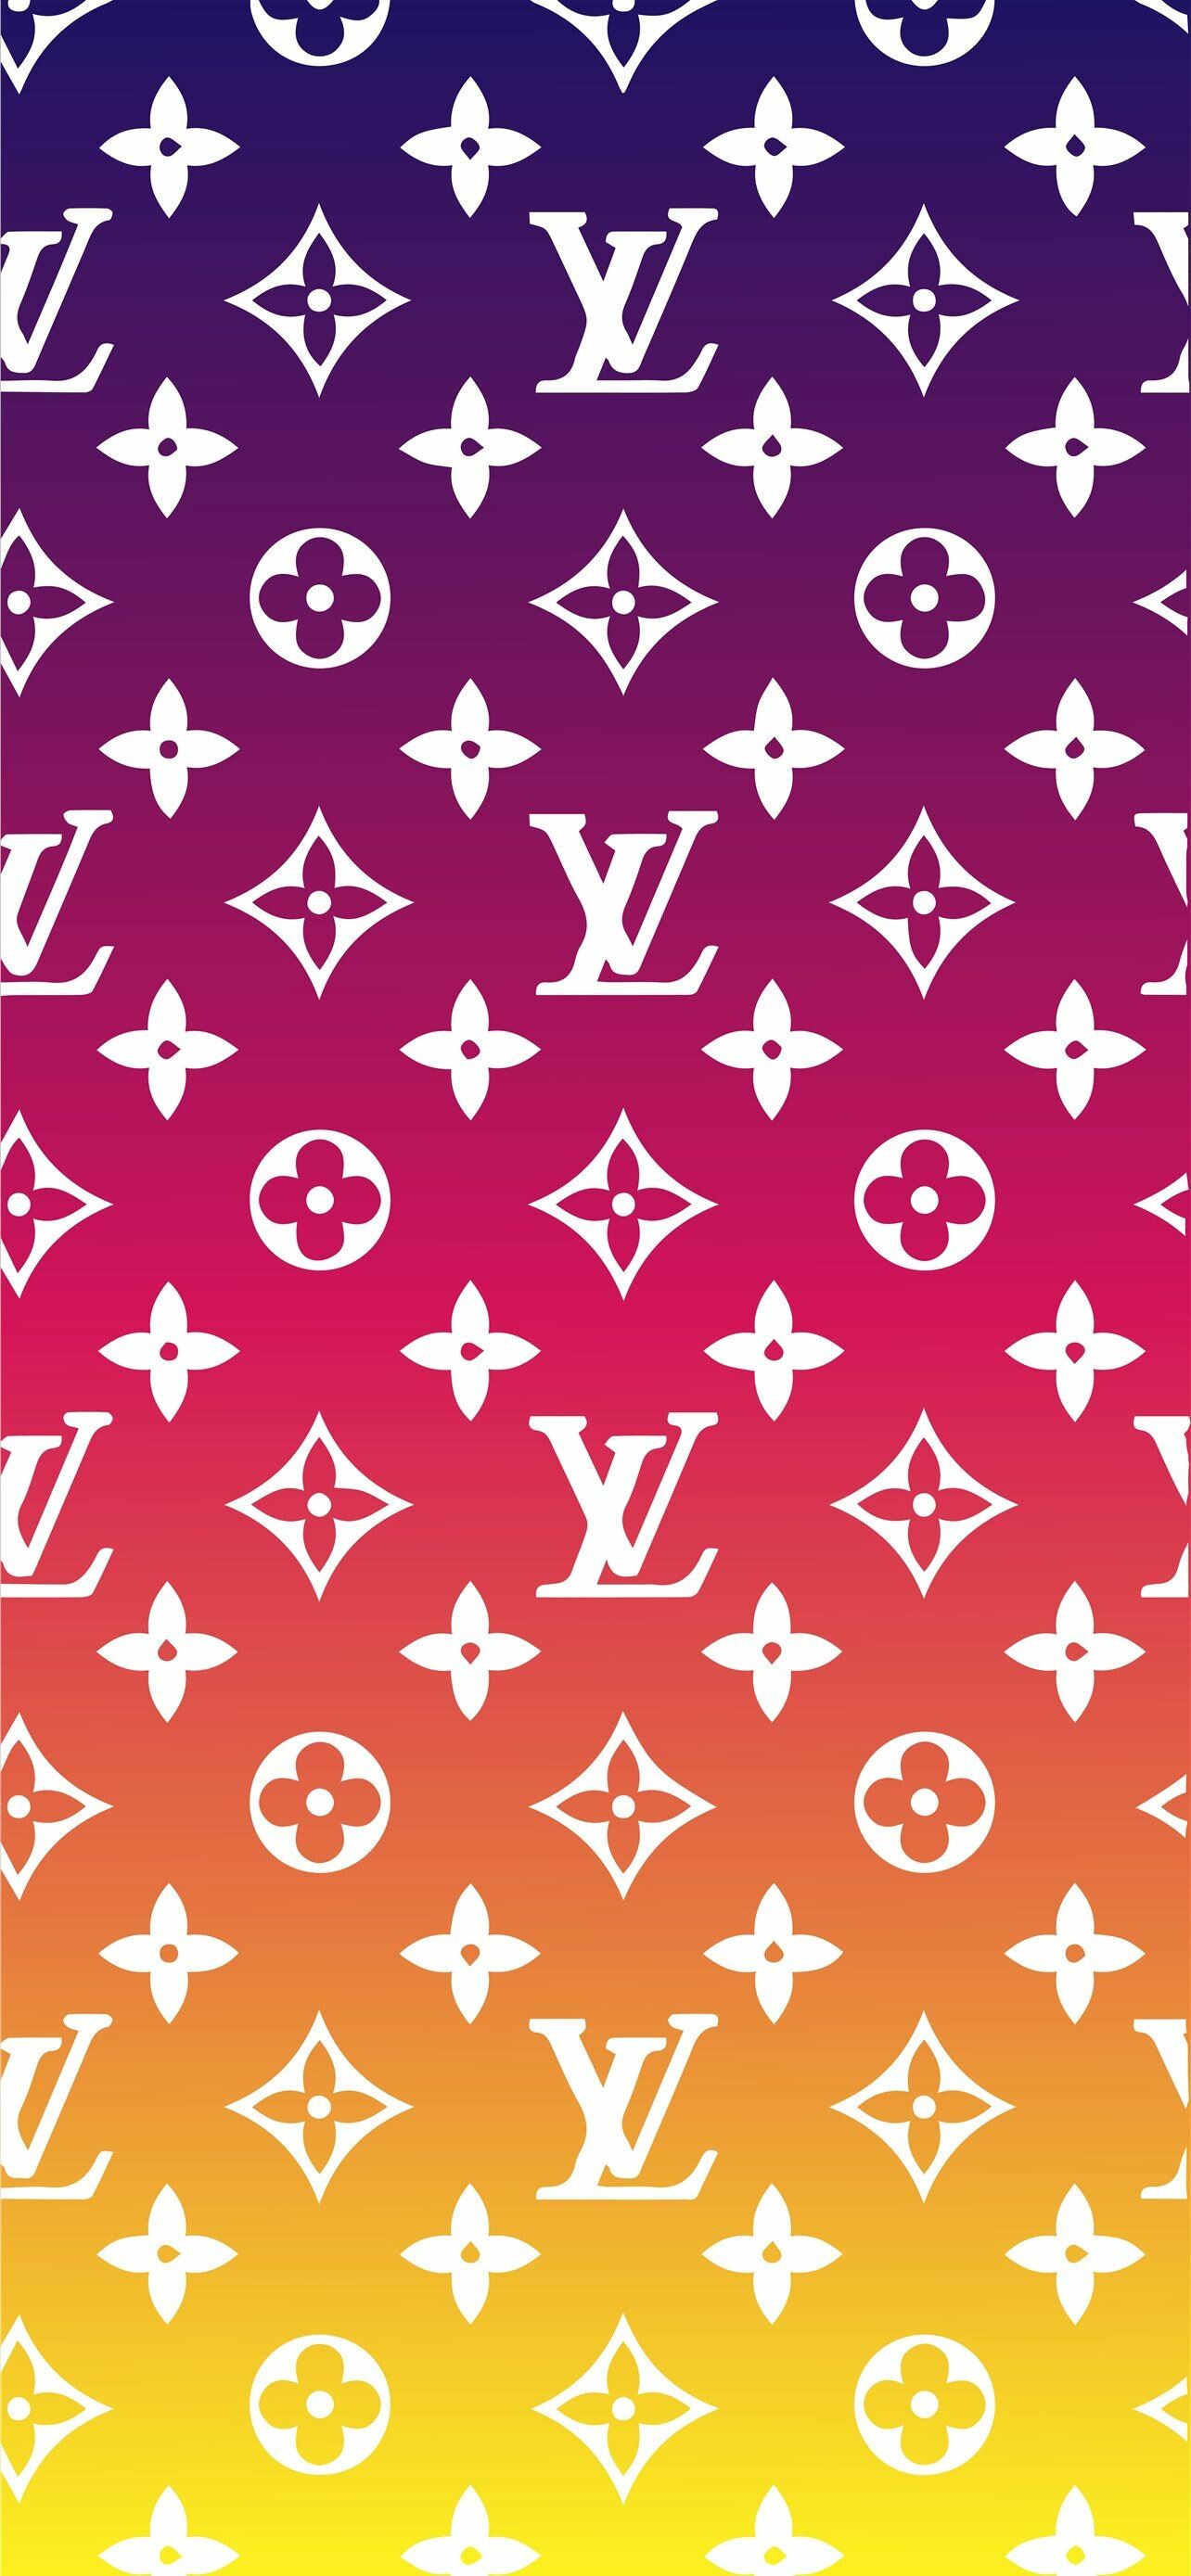 Louis Vuitton: The brand's products are widely imitated and adulterated. 1290x2780 HD Background.